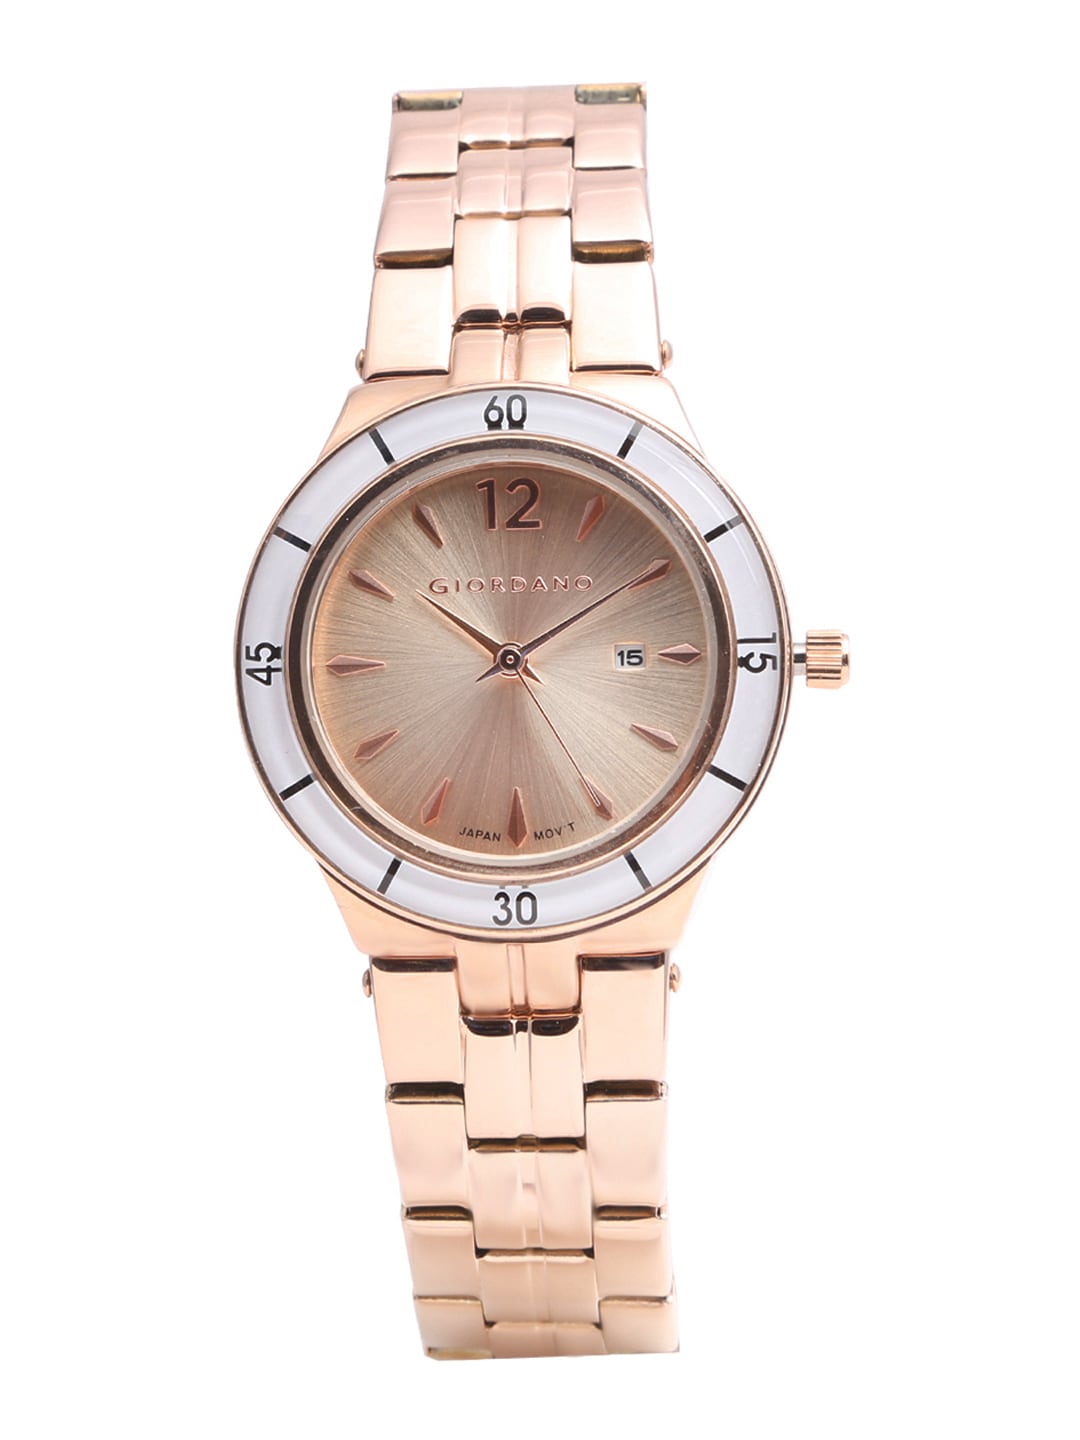 GIORDANO Women Rose Gold Analogue Watch 2973-44 Price in India